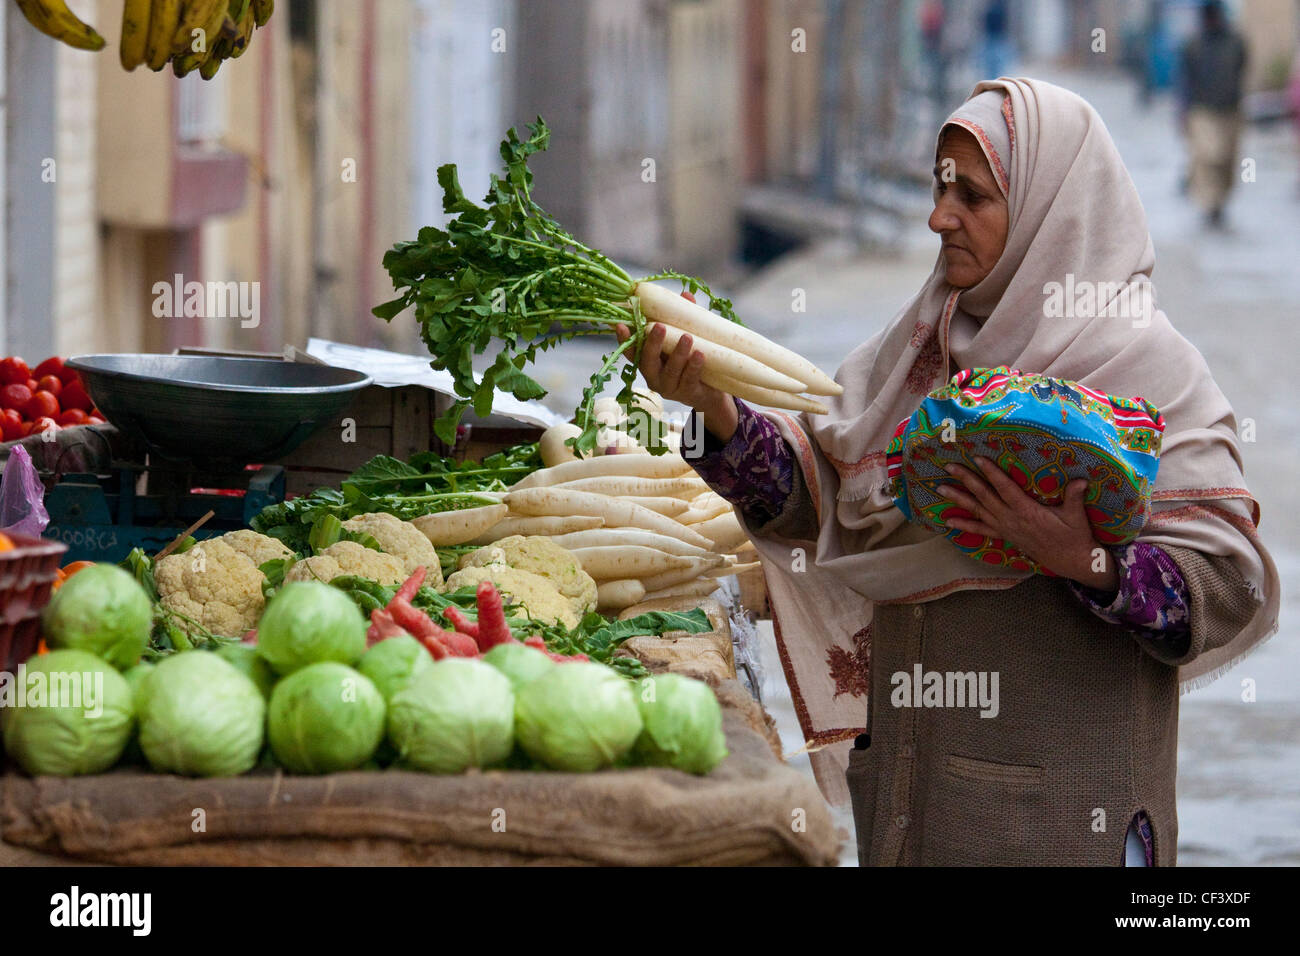 Woman buying vegetables in Islamabad, Pakistan Banque D'Images